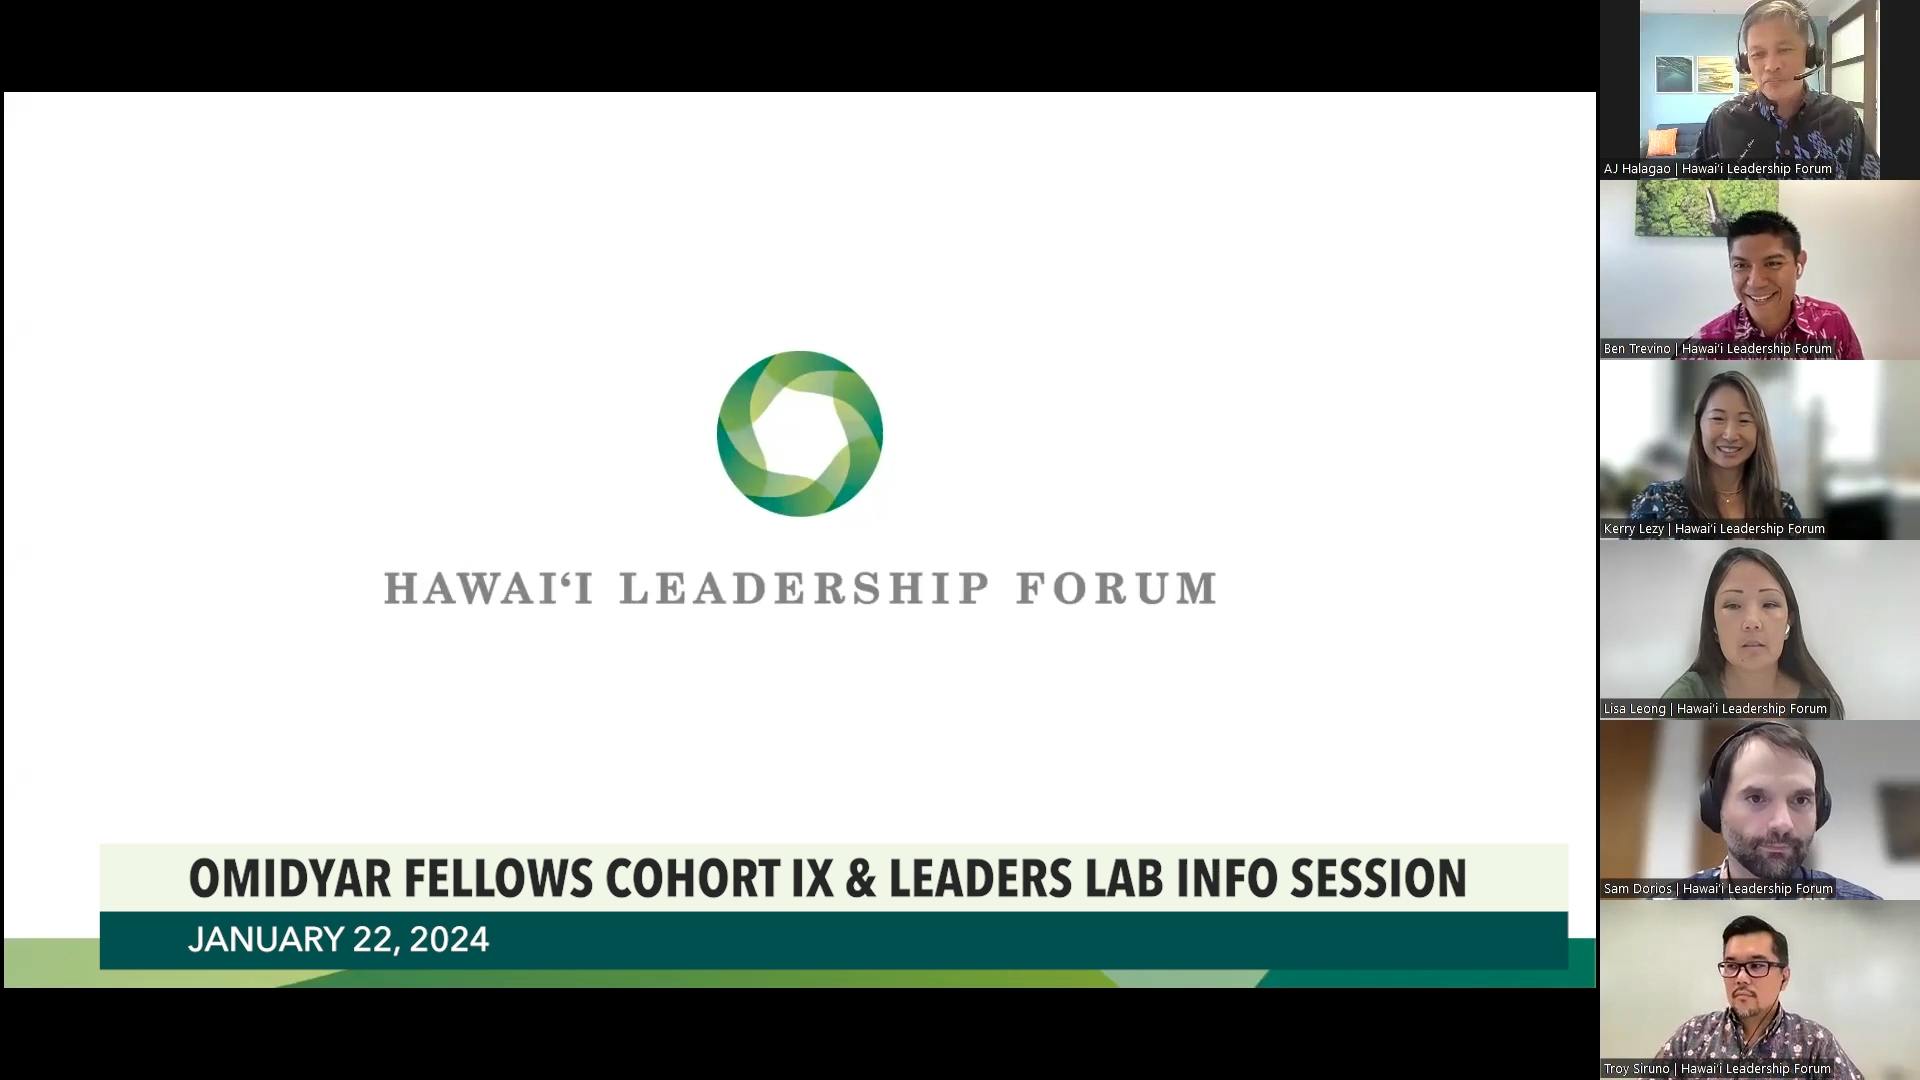 Image ofHawai‘i Leadership Forum Staff during the 2024 HLF Info Session with text that reads "Omidyar Fellows Cohort IX and Leaders Lab Info Session.""